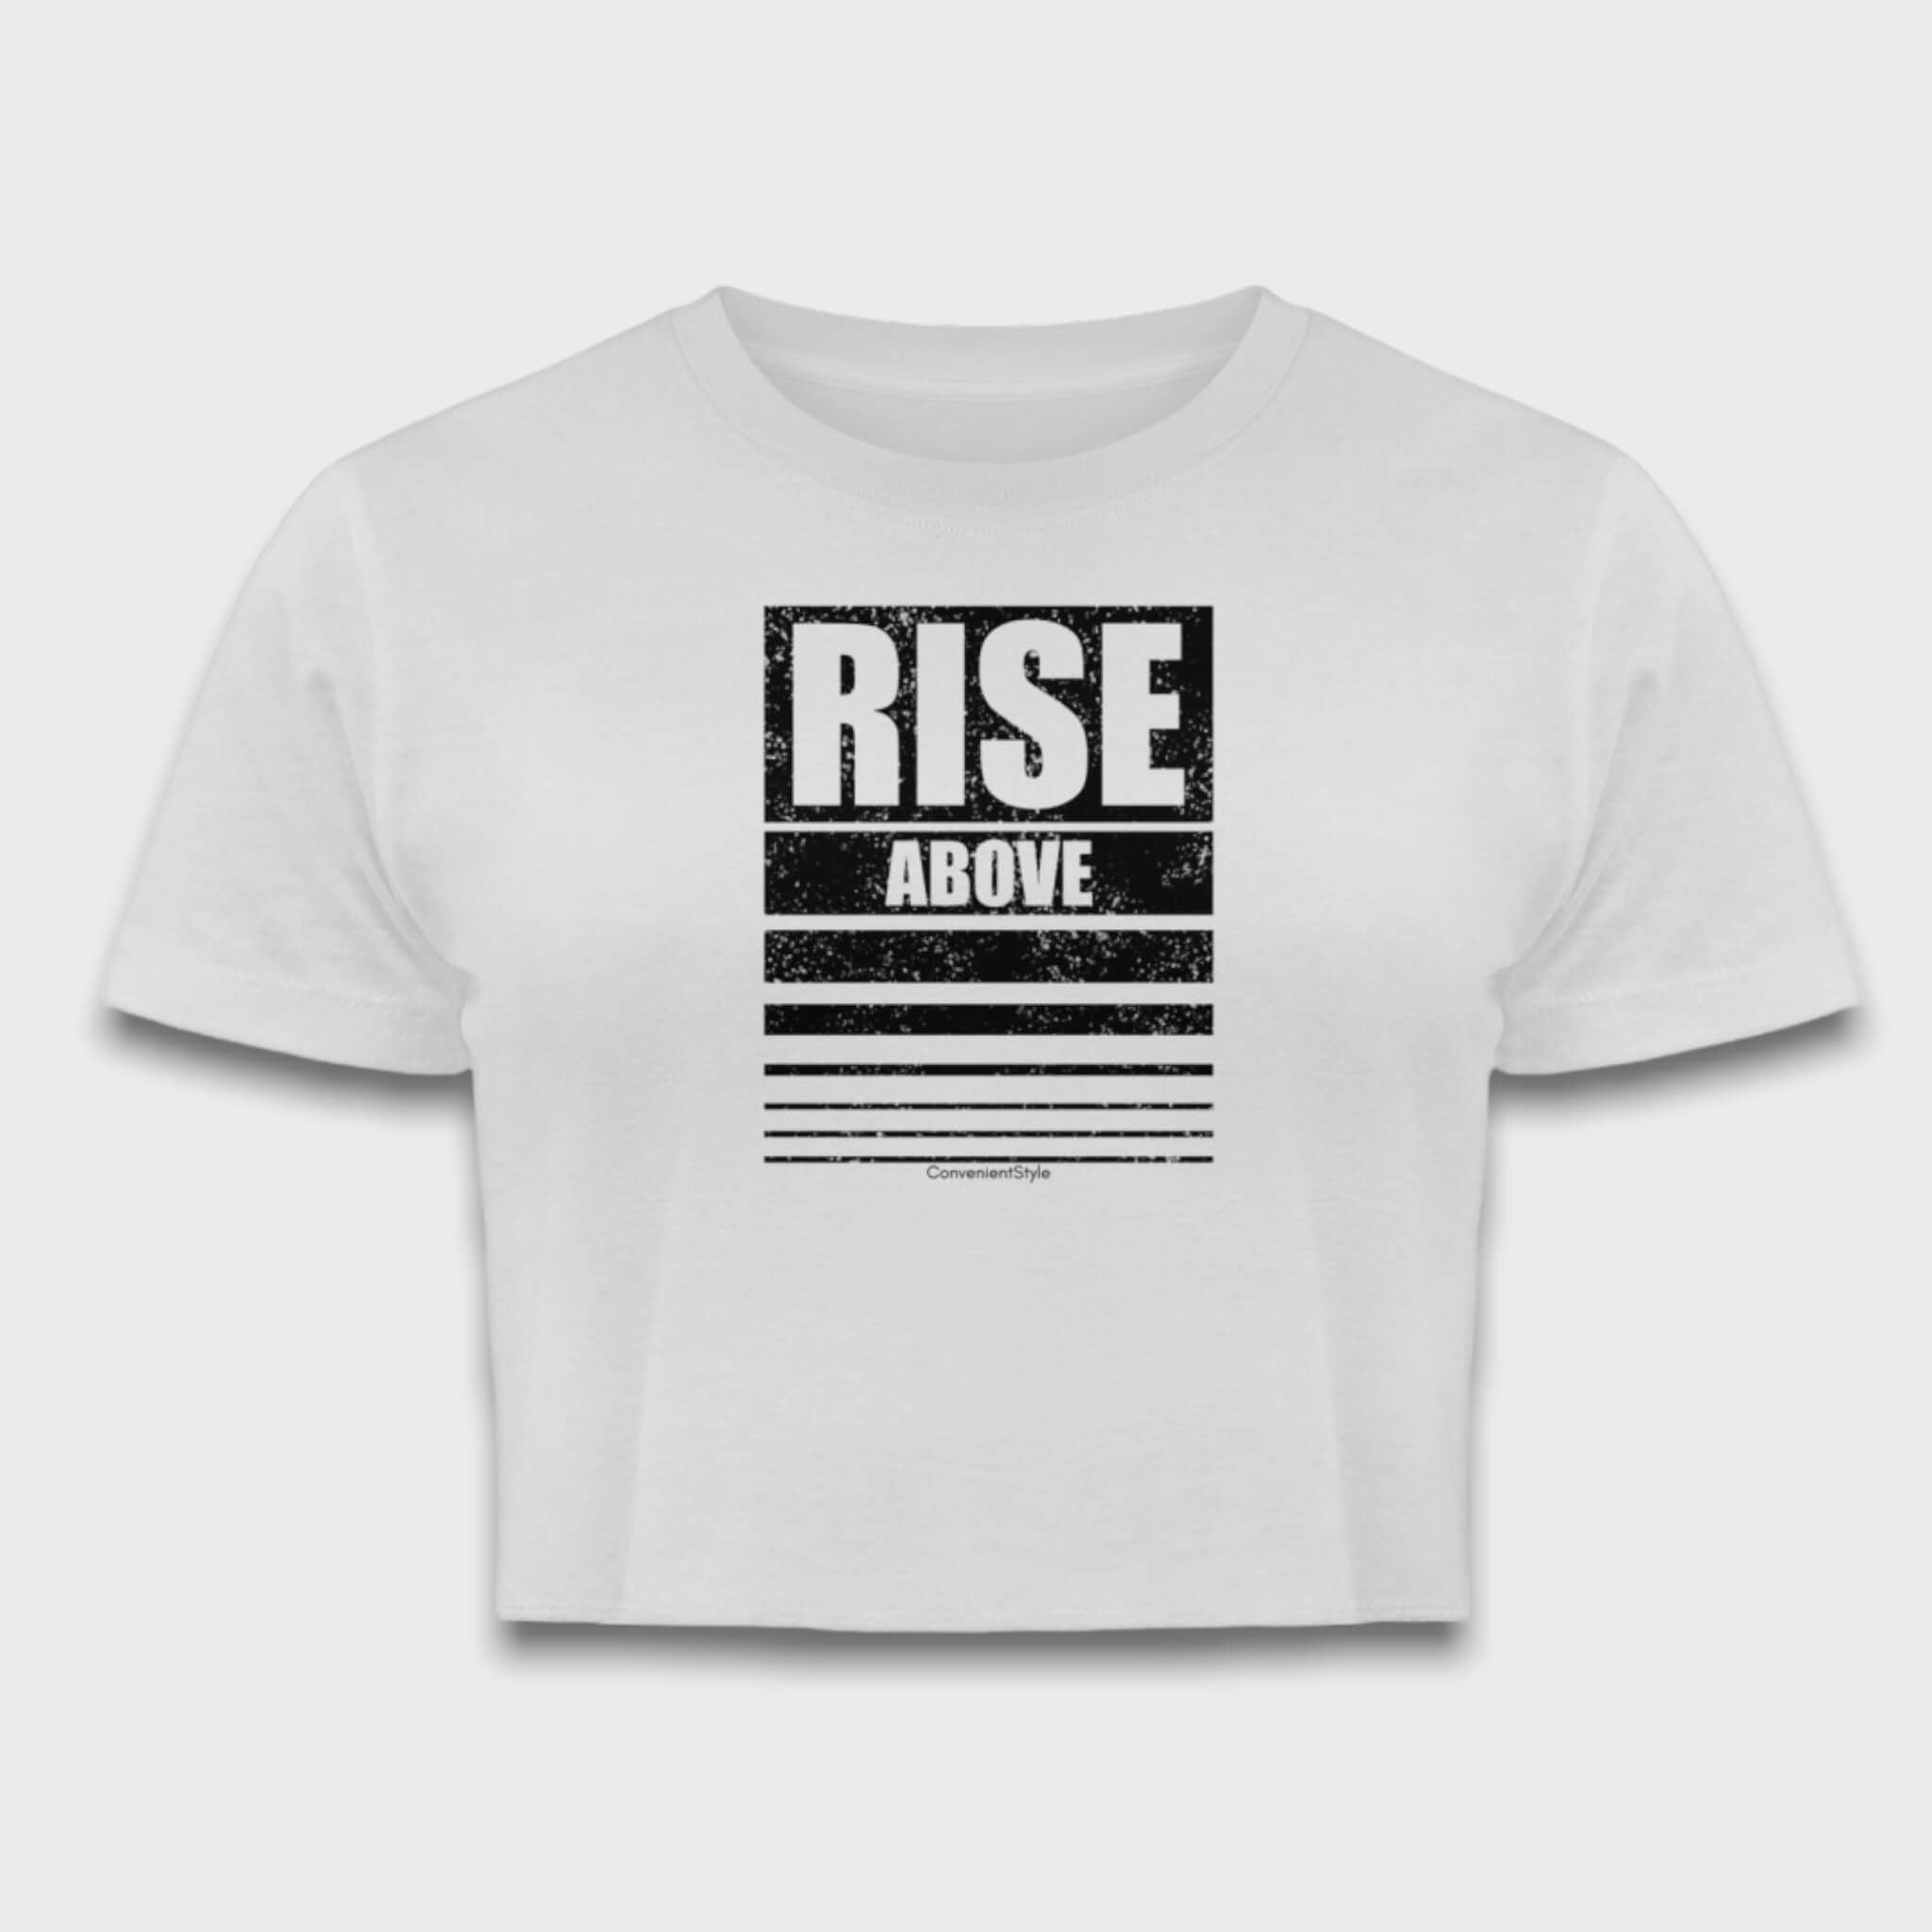 Rise above - Crop Top